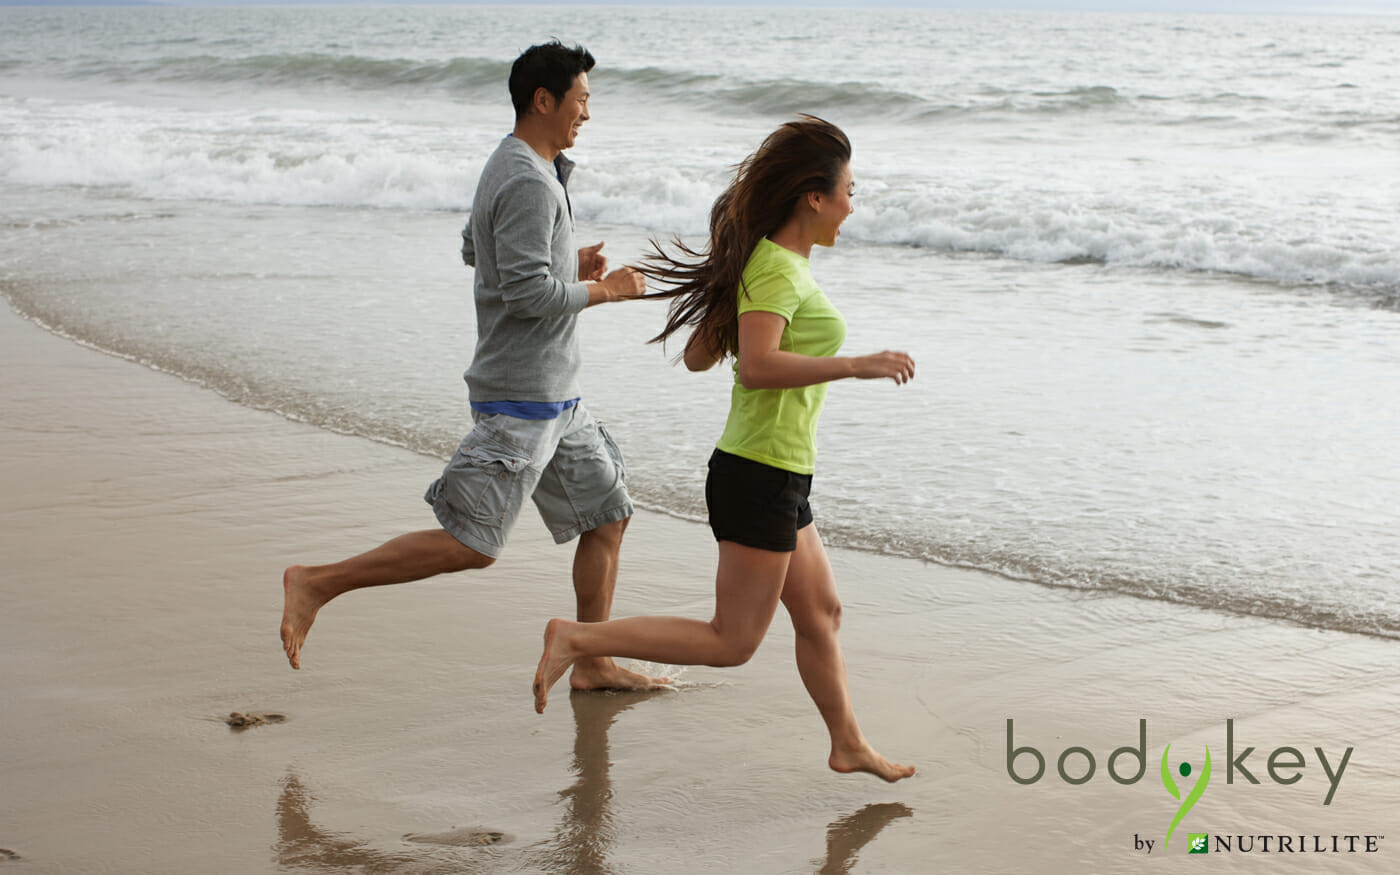 Amway offers the Bodykey by Nutrilite™ program, a customized weight management plan